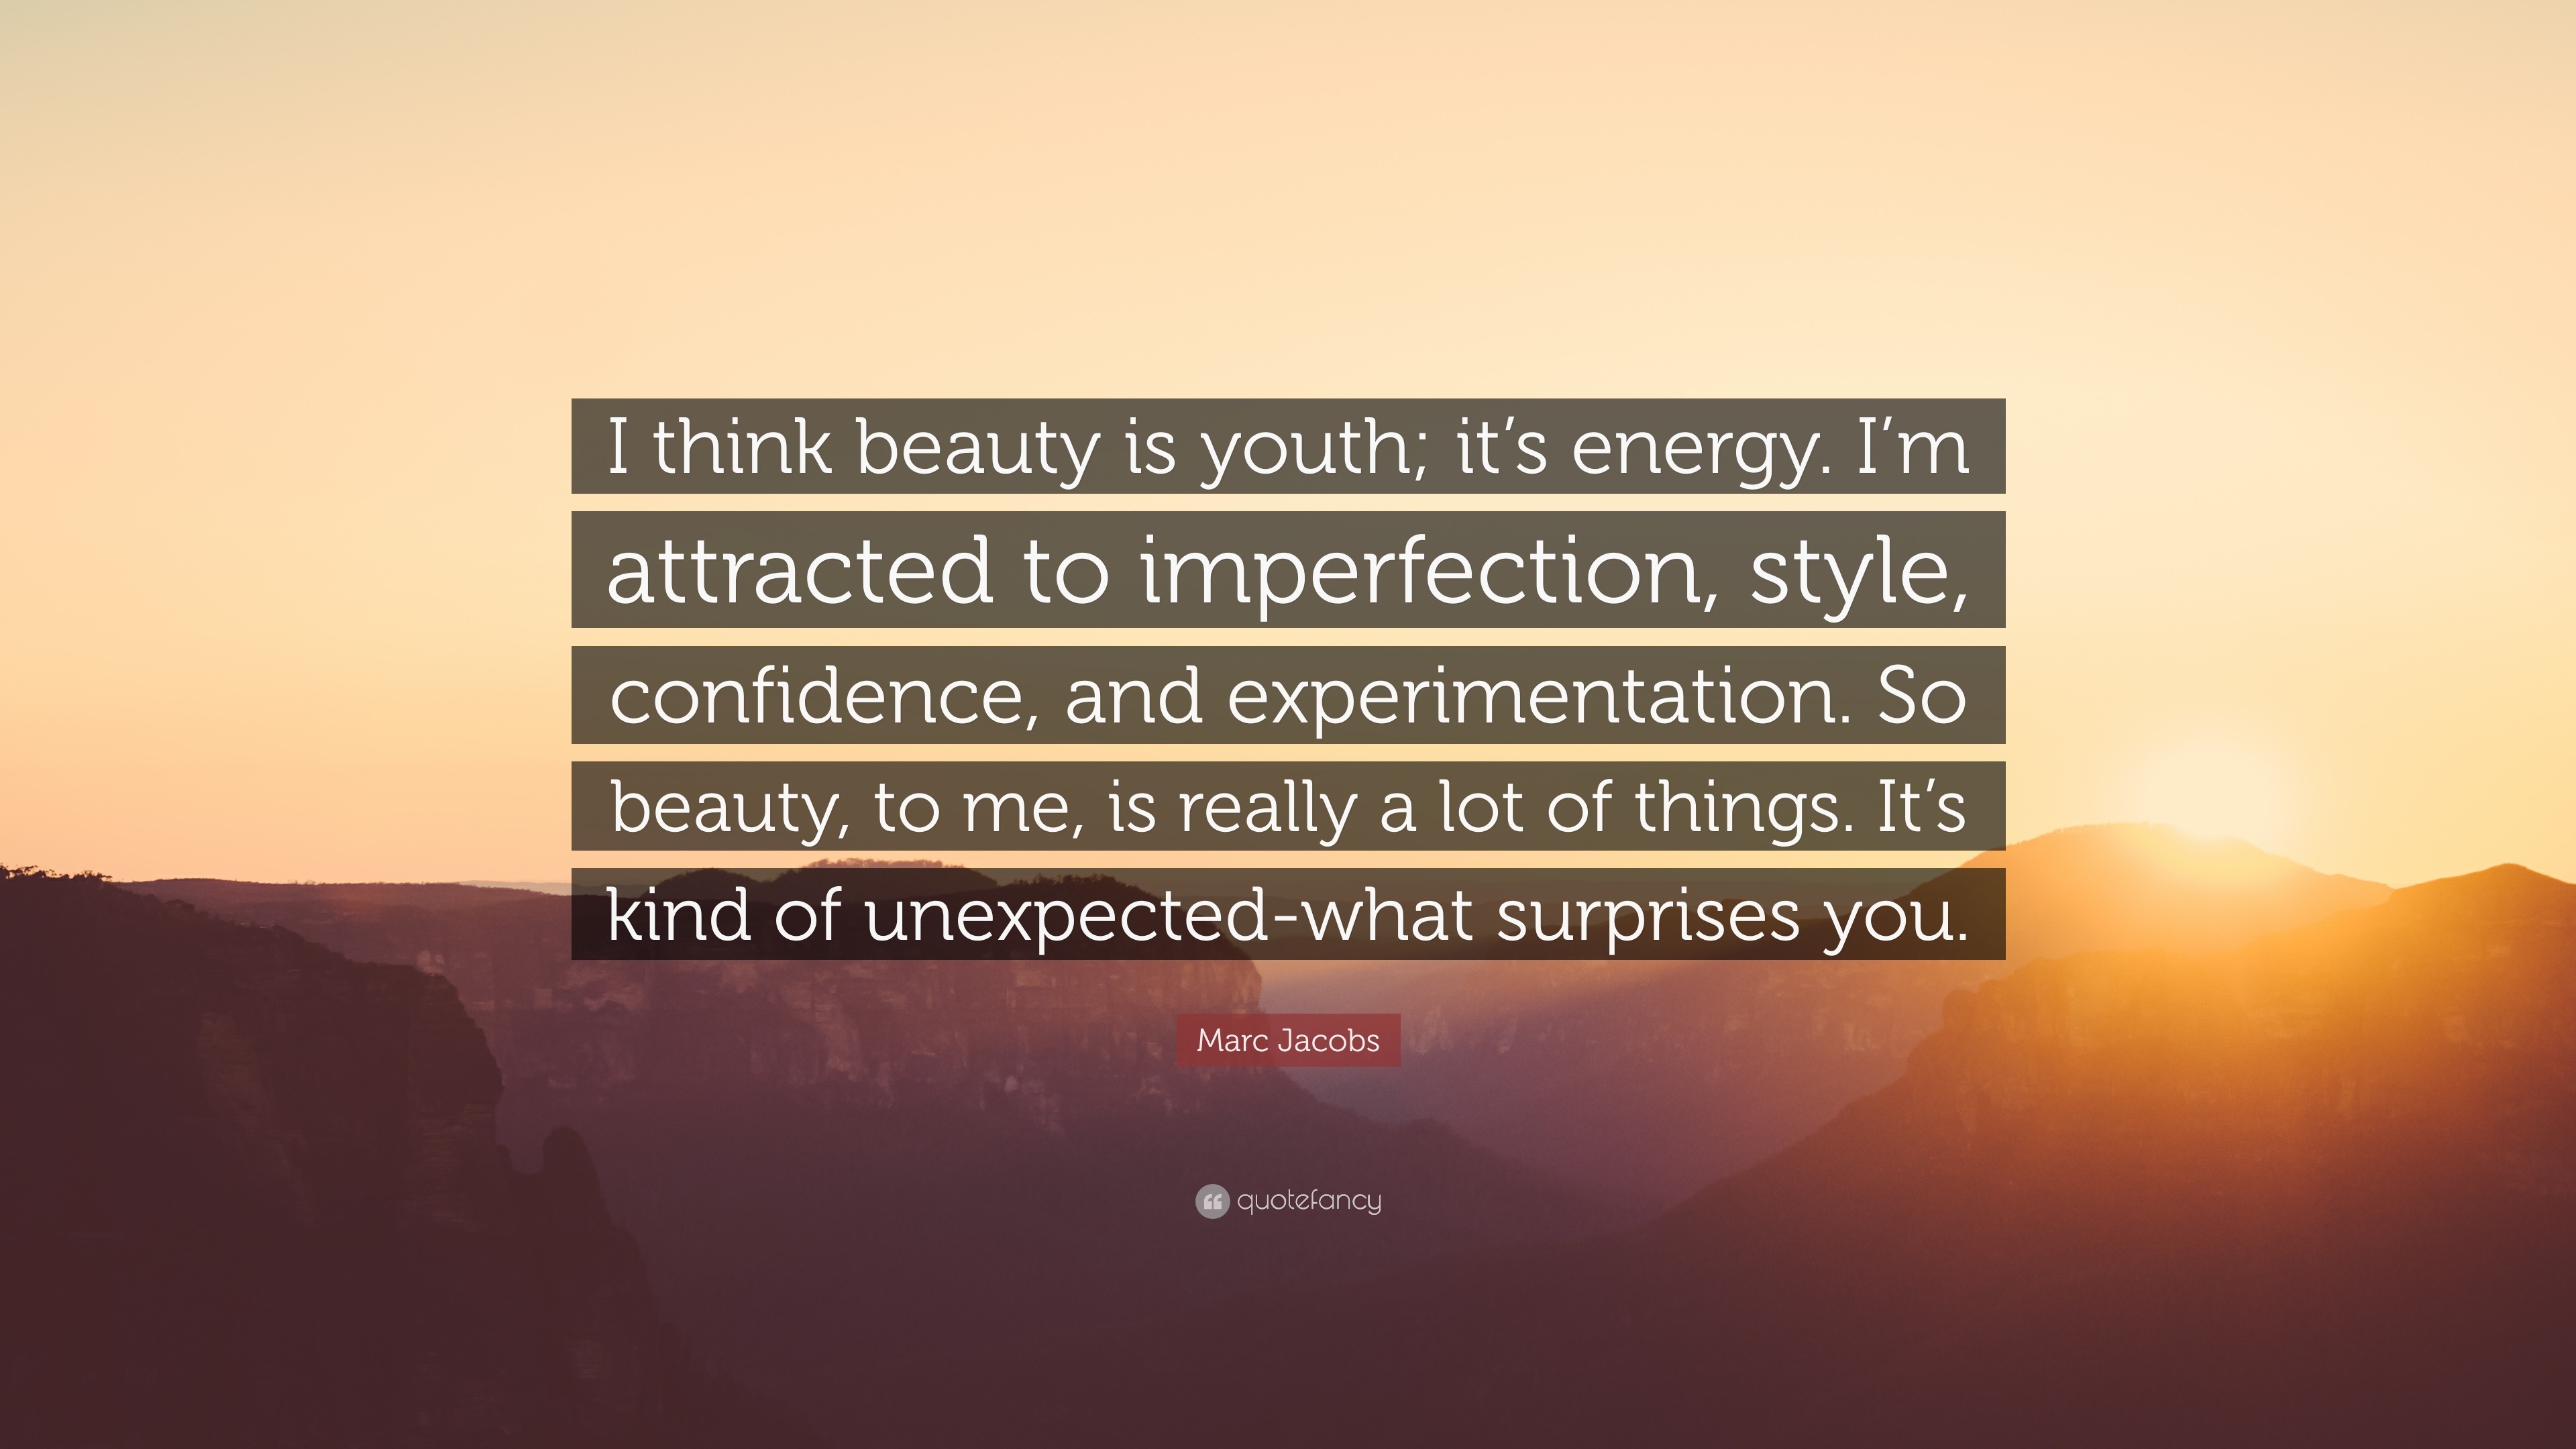 Marc Jacobs Quote: “I think beauty is youth; it’s energy. I’m attracted